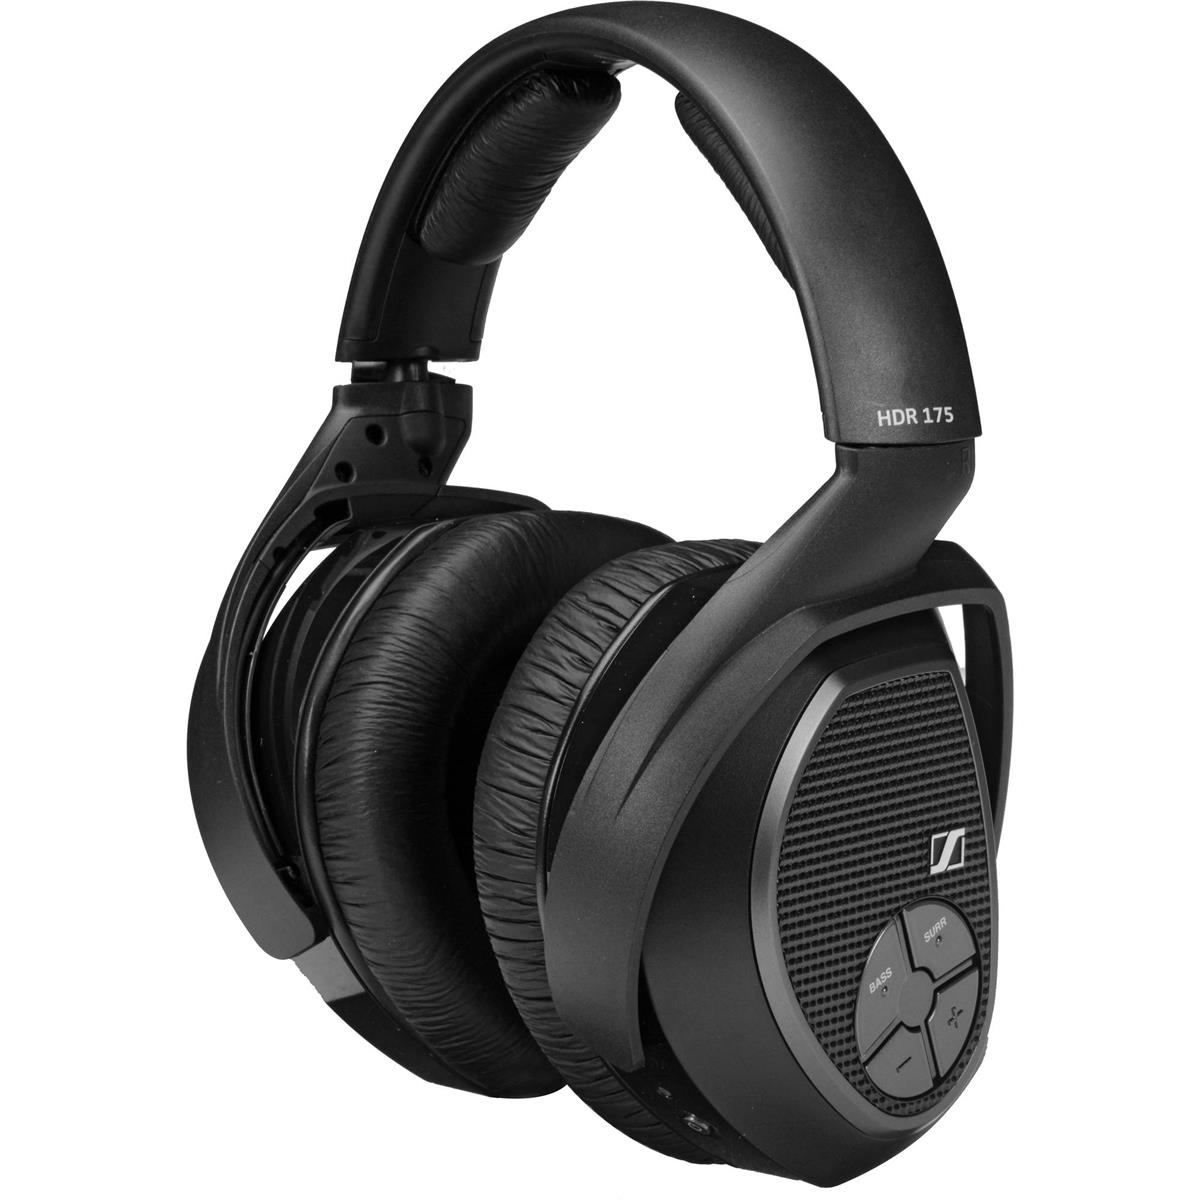 Image of Sennheiser HDR 175 Additional/Replacement Headphone for RS 175 Headphone System